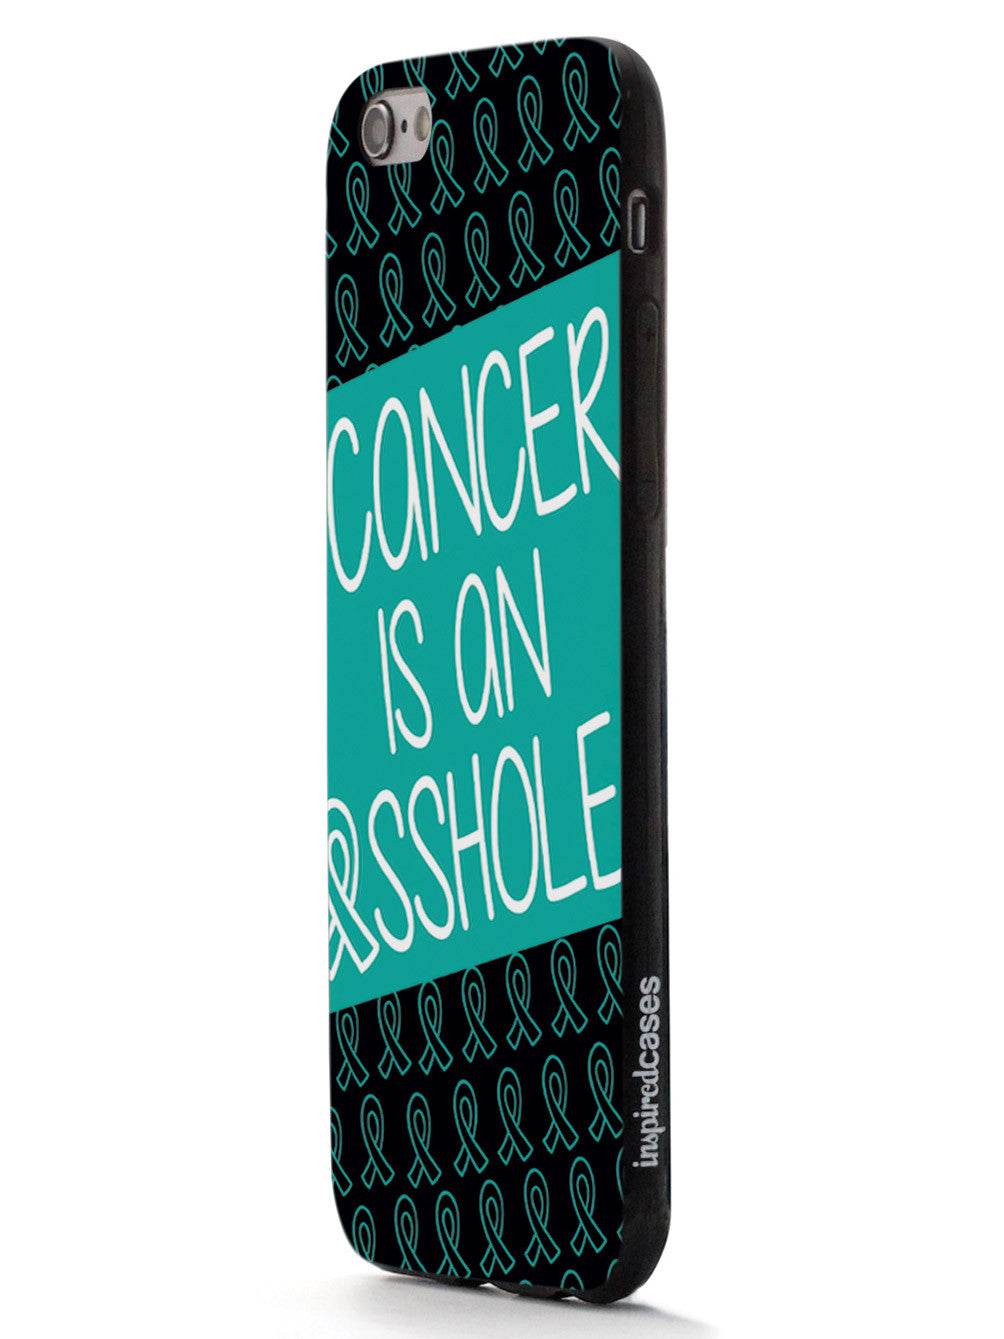 Cancer Is An Asshole - Teal Case